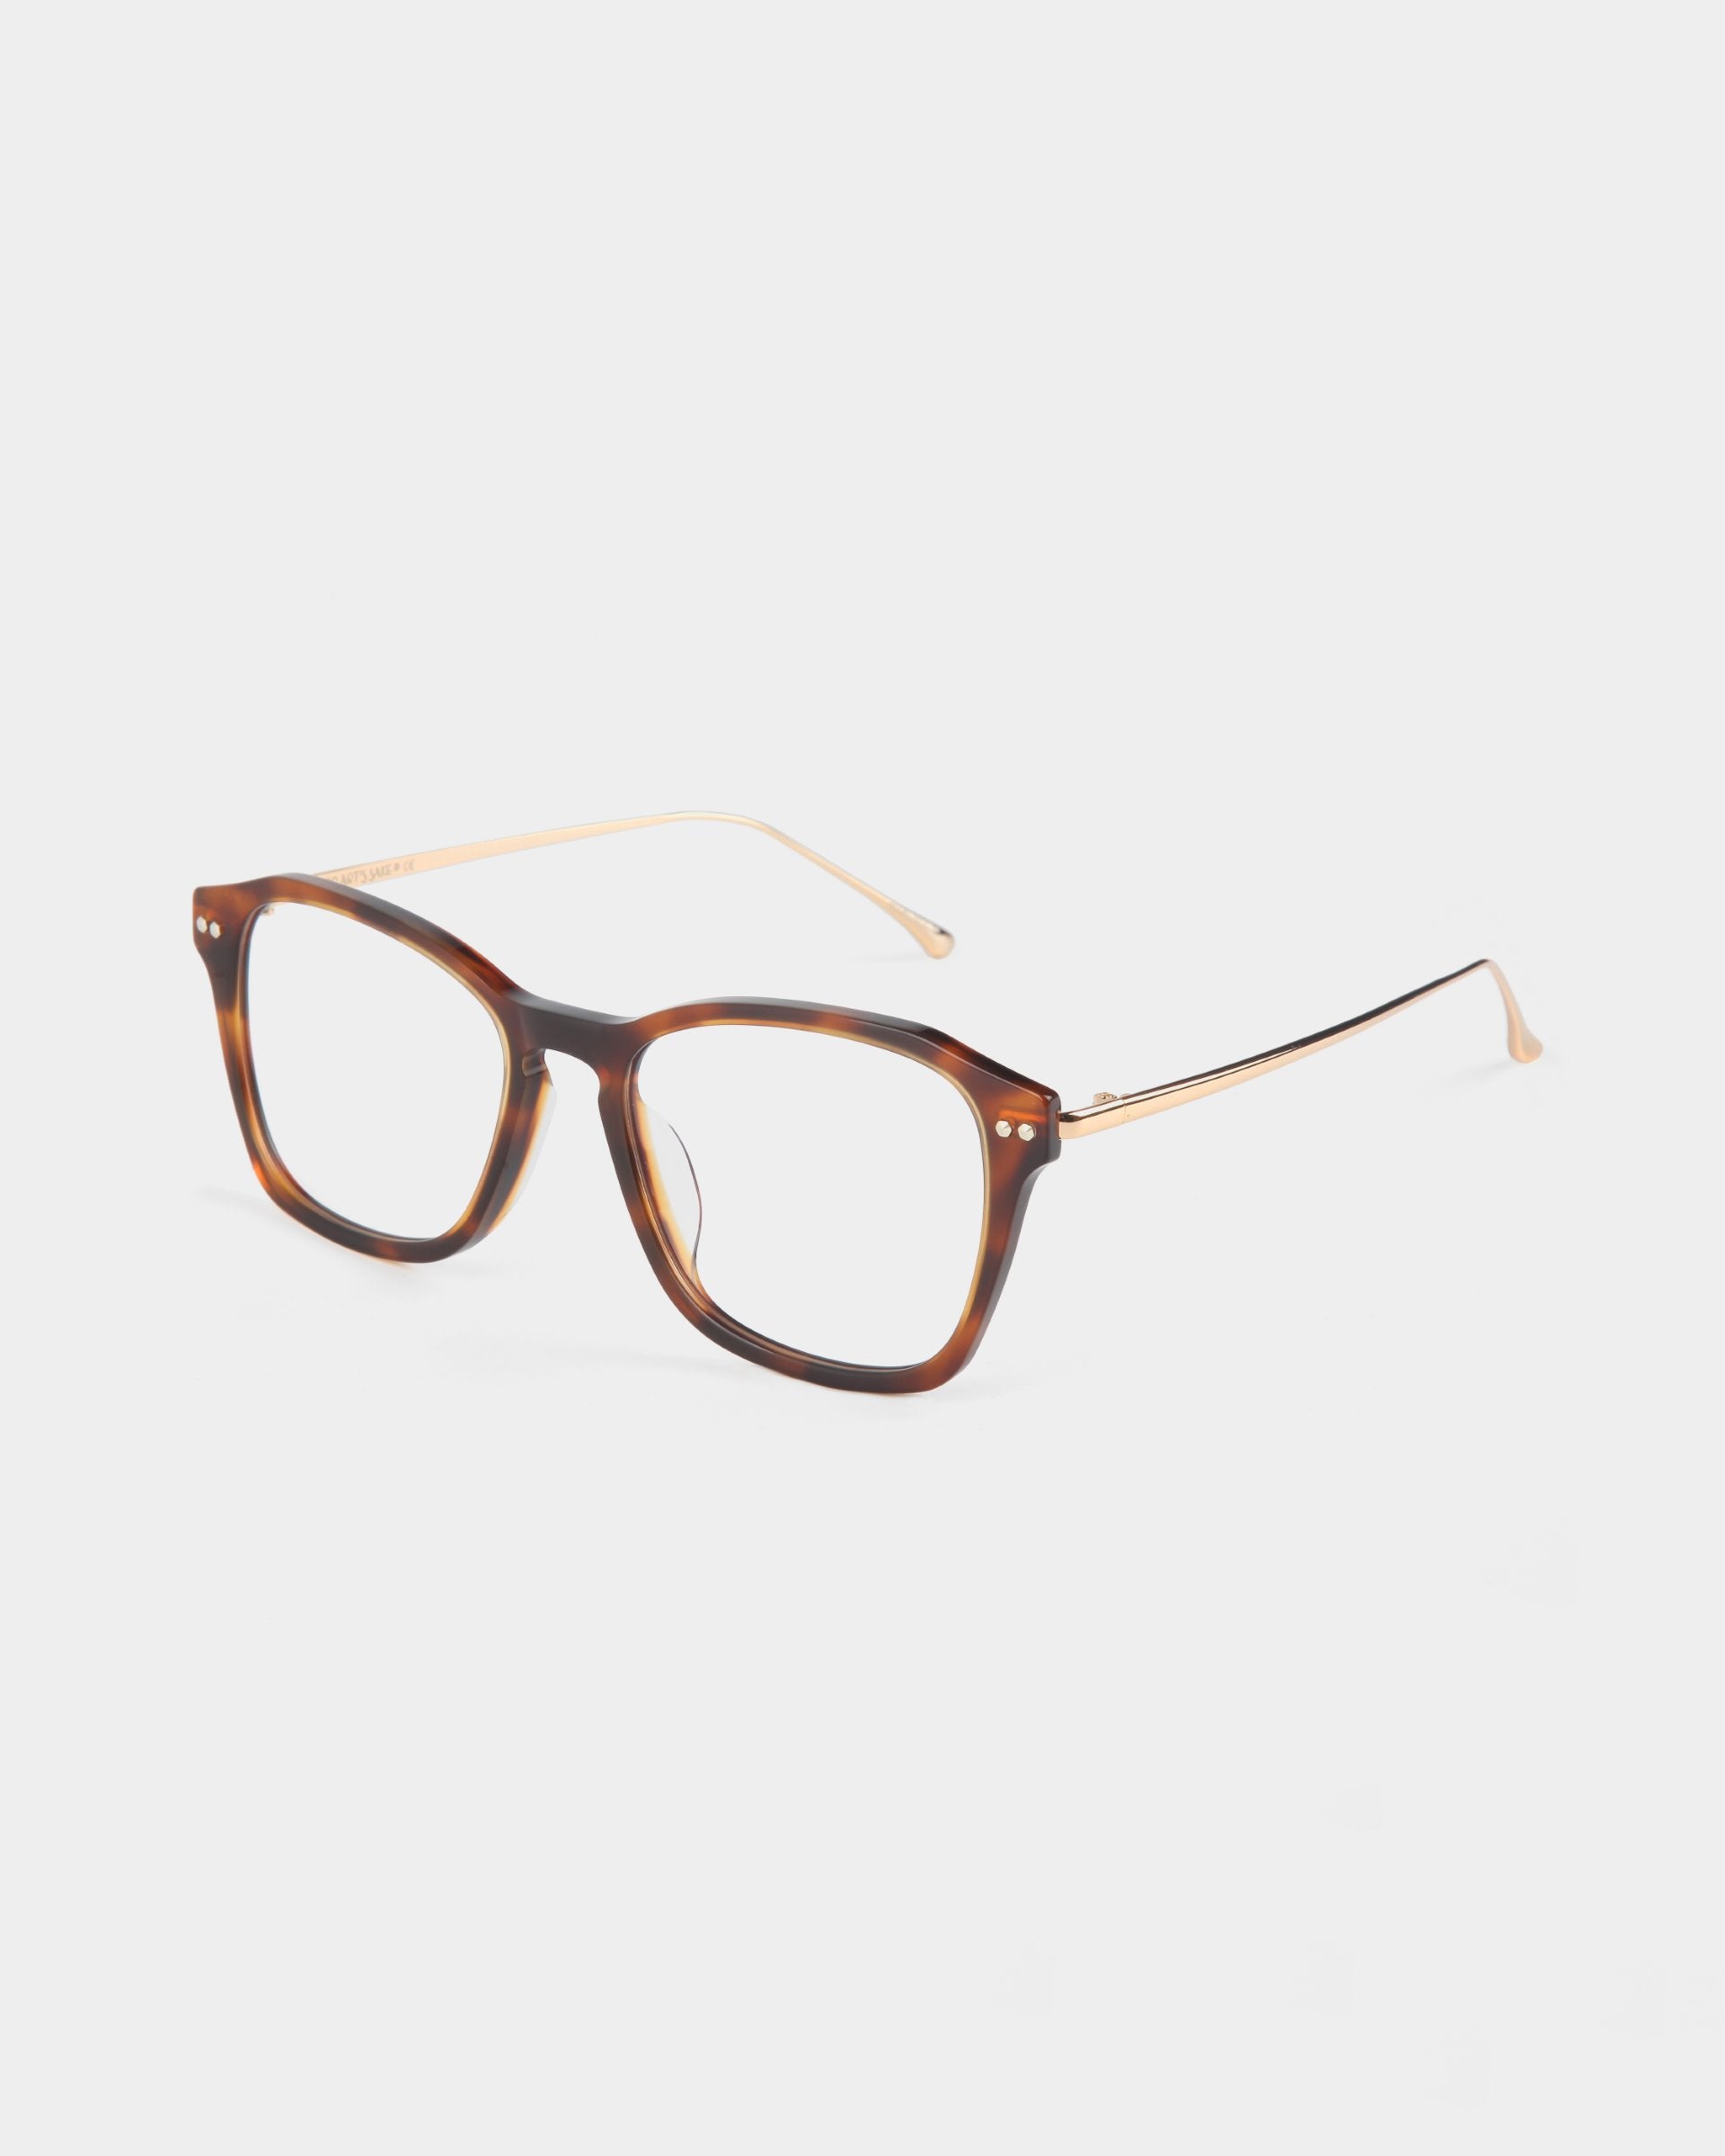 A pair of eyeglasses featuring square, tortoiseshell frames and thin gold temples. The style is modern with a blend of classic and contemporary design elements. They come with adjustable nose pads for comfort and an optional blue light filter. The background is plain and light-colored. This stylish accessory is the Morris by For Art's Sake®.